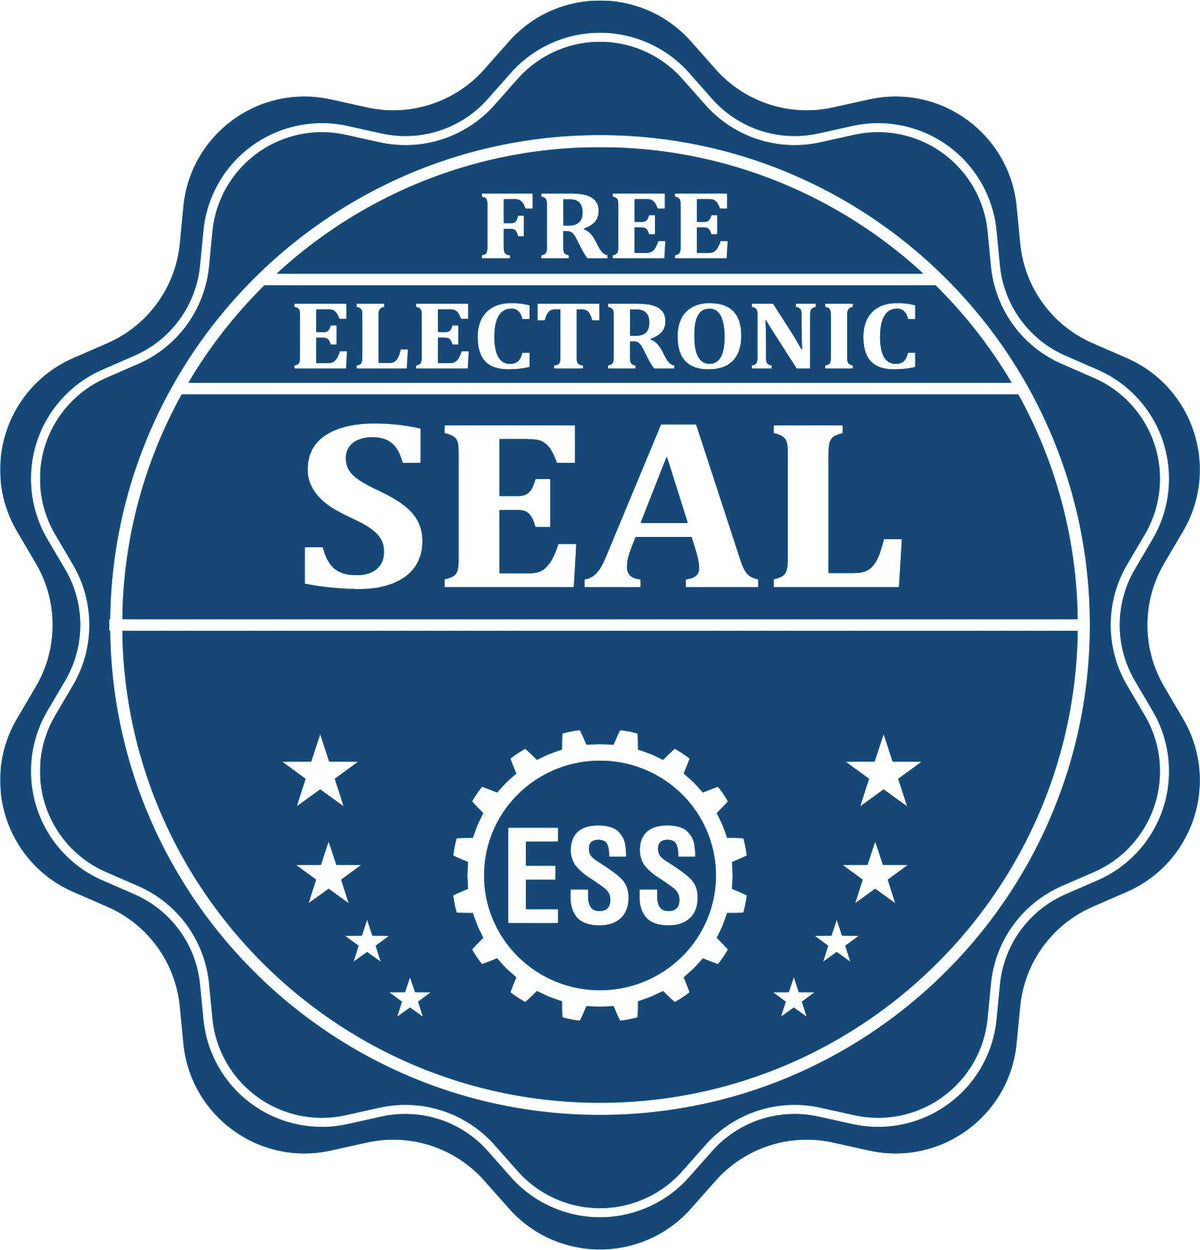 A badge showing a free electronic seal for the Gift Louisiana Architect Seal with stars and the ESS gear on the emblem.